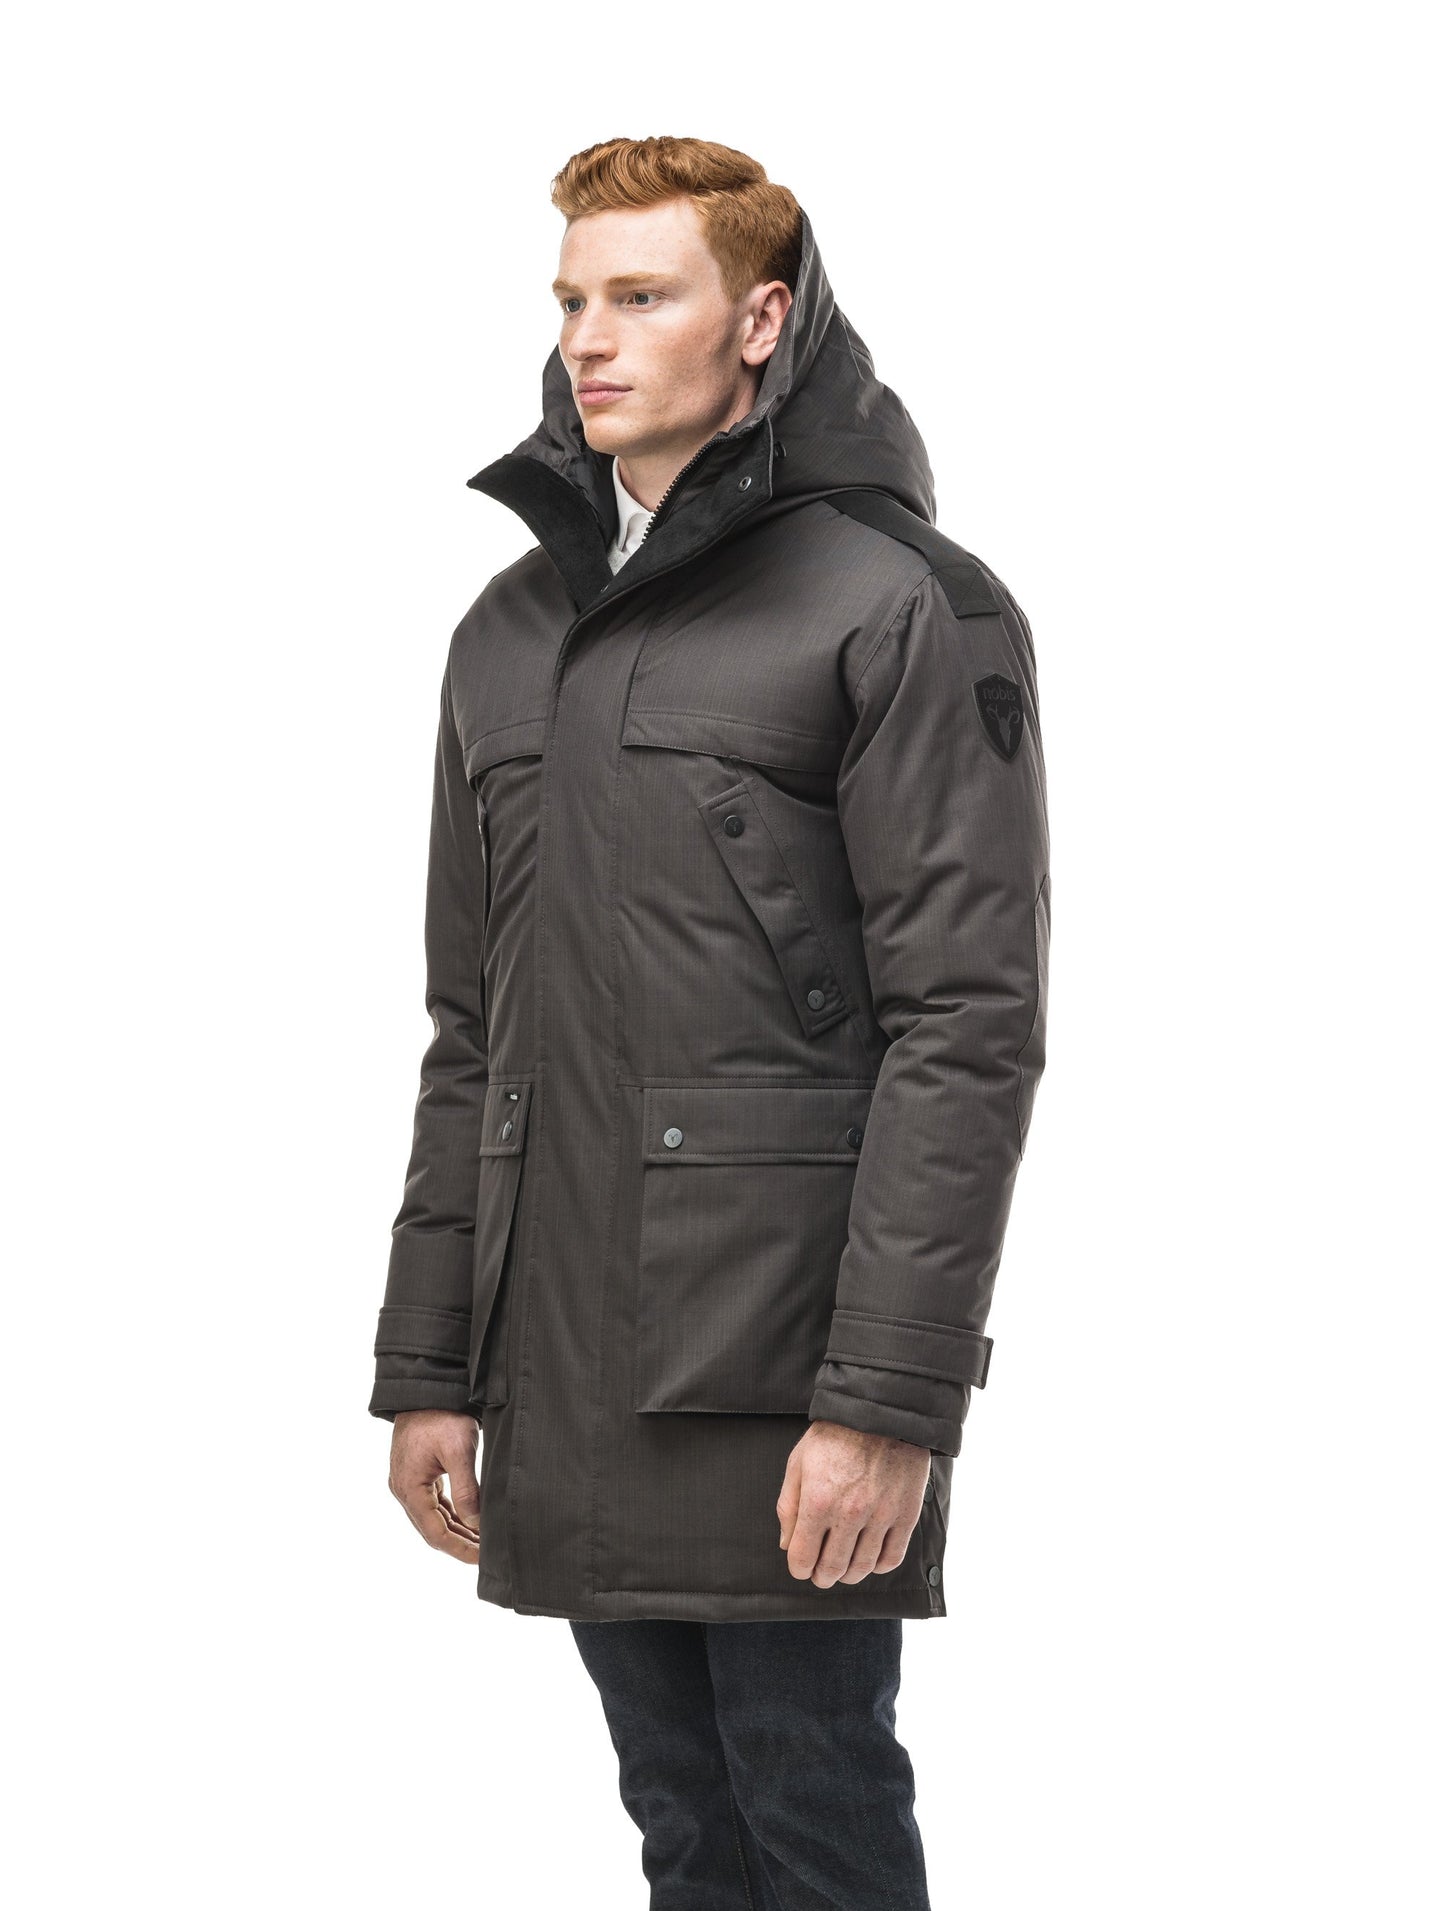 Men's Best Selling Parka the Yatesy is a down filled jacket with a zipper closure and magnetic placket in CH Steel Grey